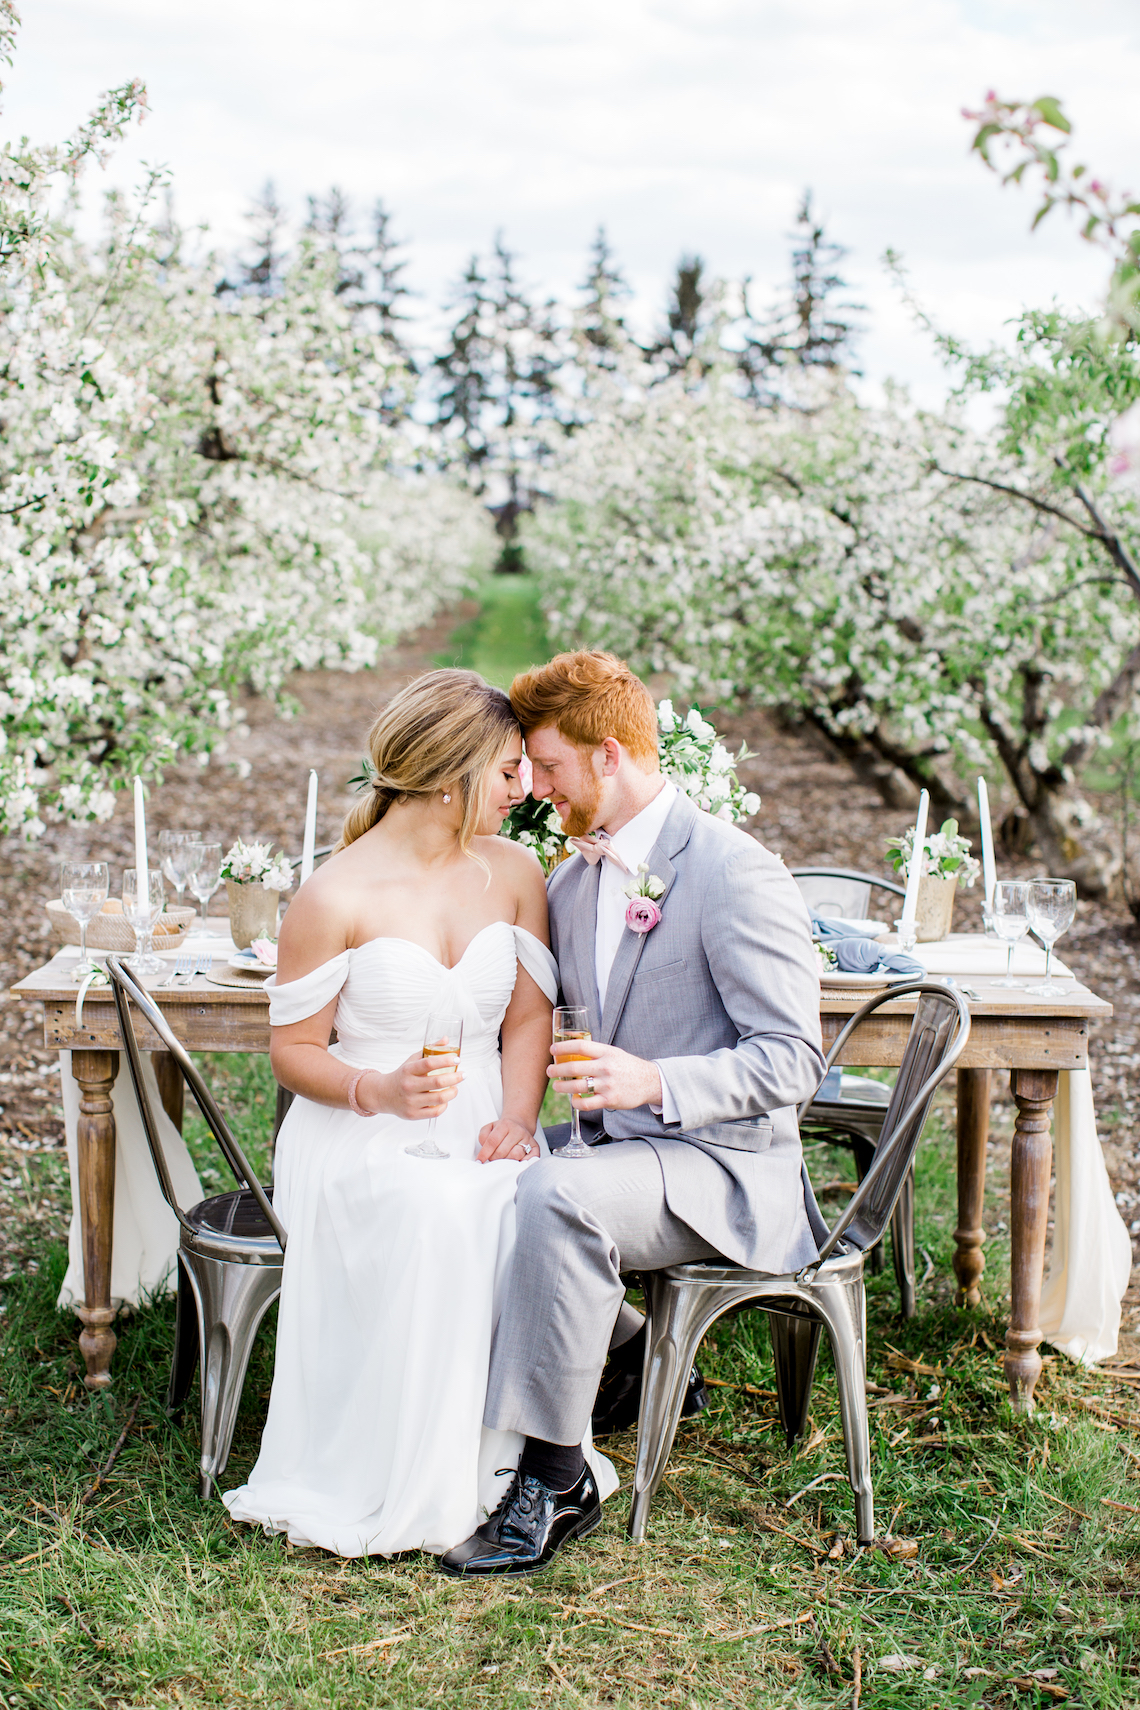 Bright and Colorful Apple Blossom Orchard Wedding Inspiration | Shanell Photography & Mitten Weddings and Events 19